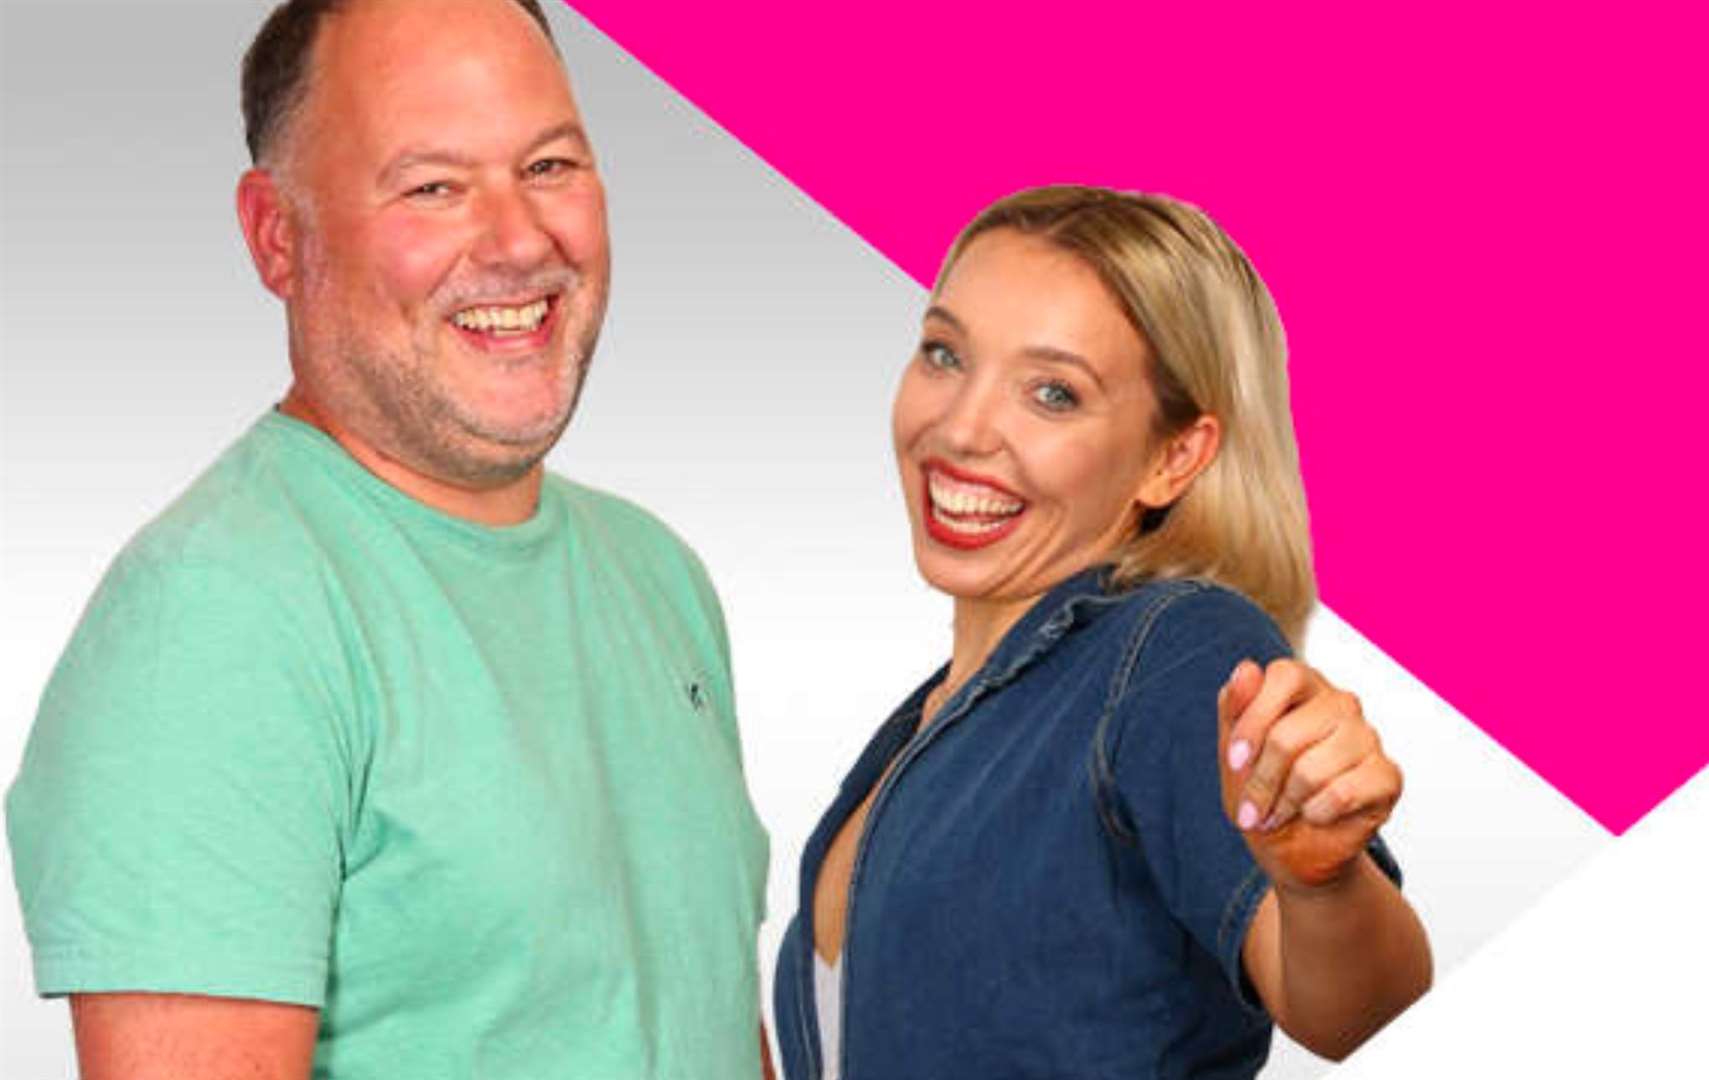 kmfm has launched its new flagship show with Garry and Chelsea